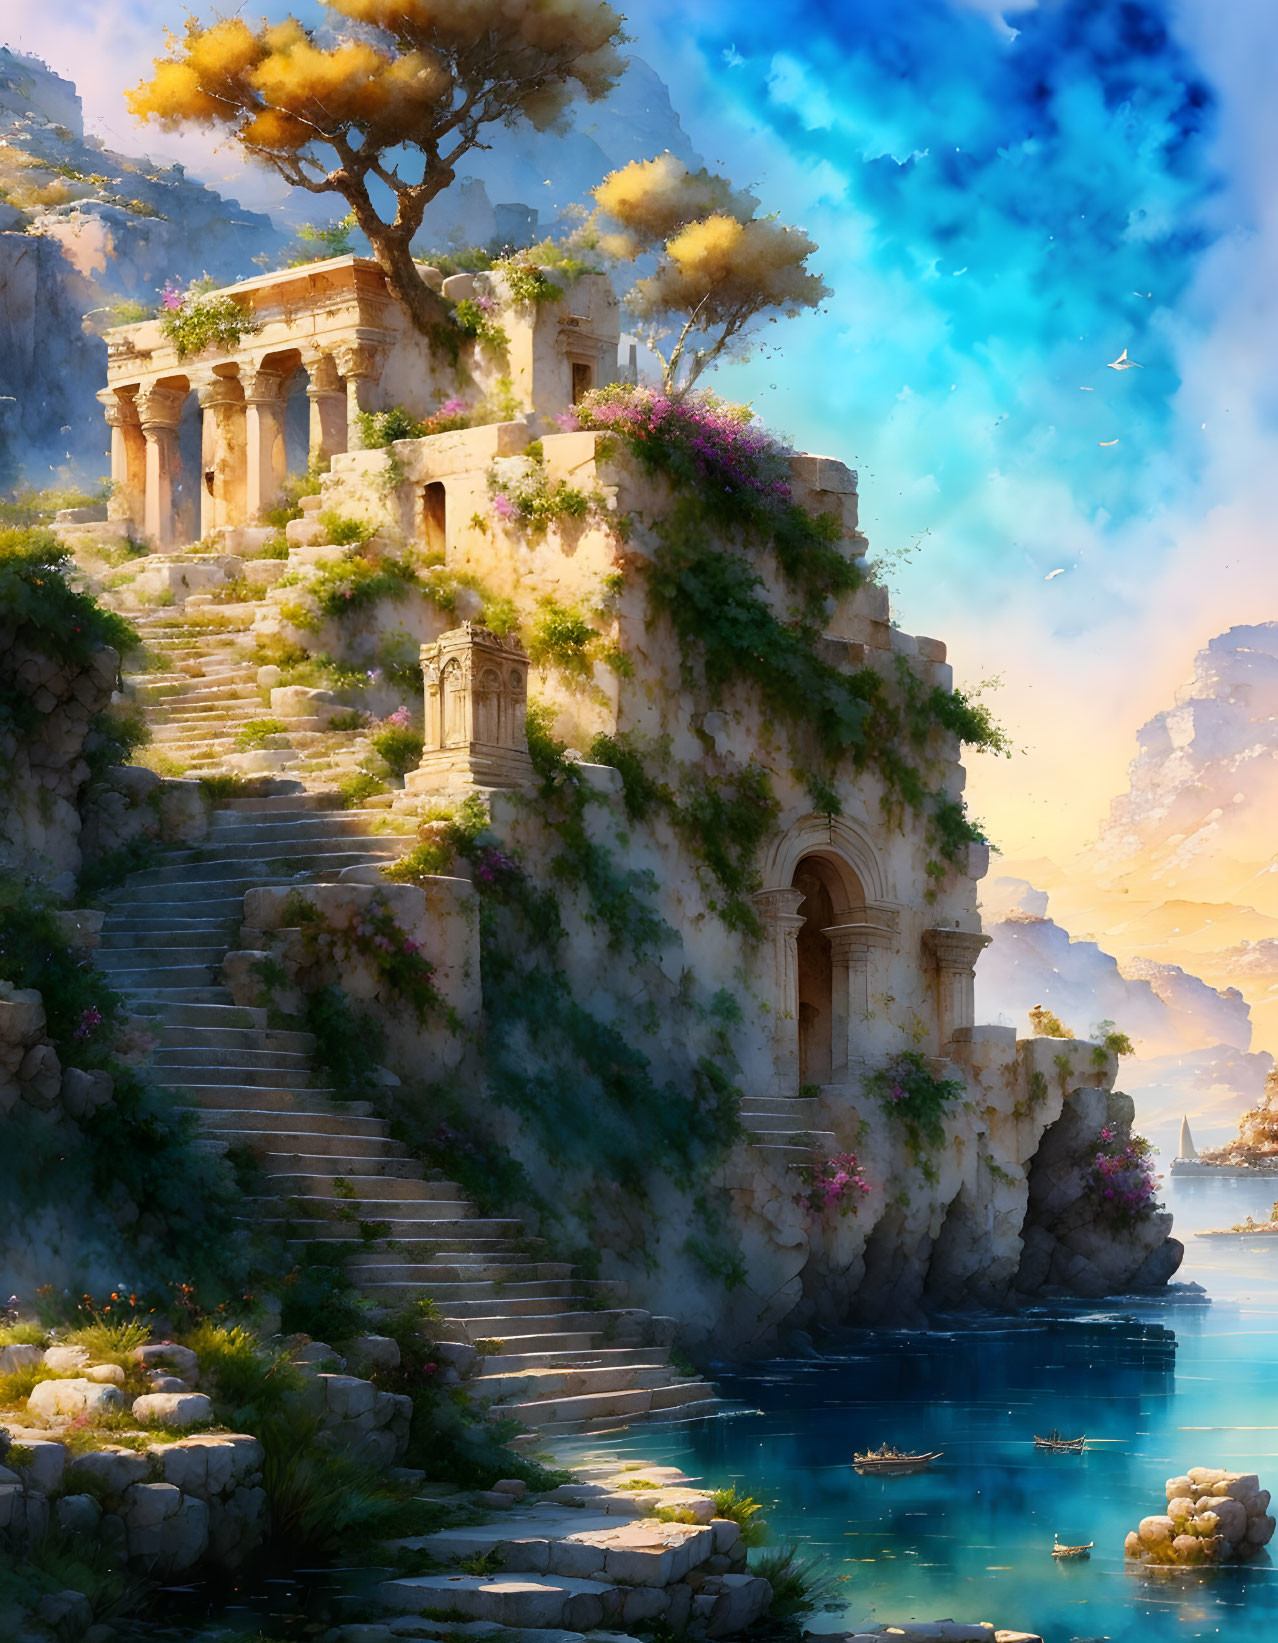 Digital artwork: Classical ruin on cliff by sea with steps, lush vegetation, vibrant sky